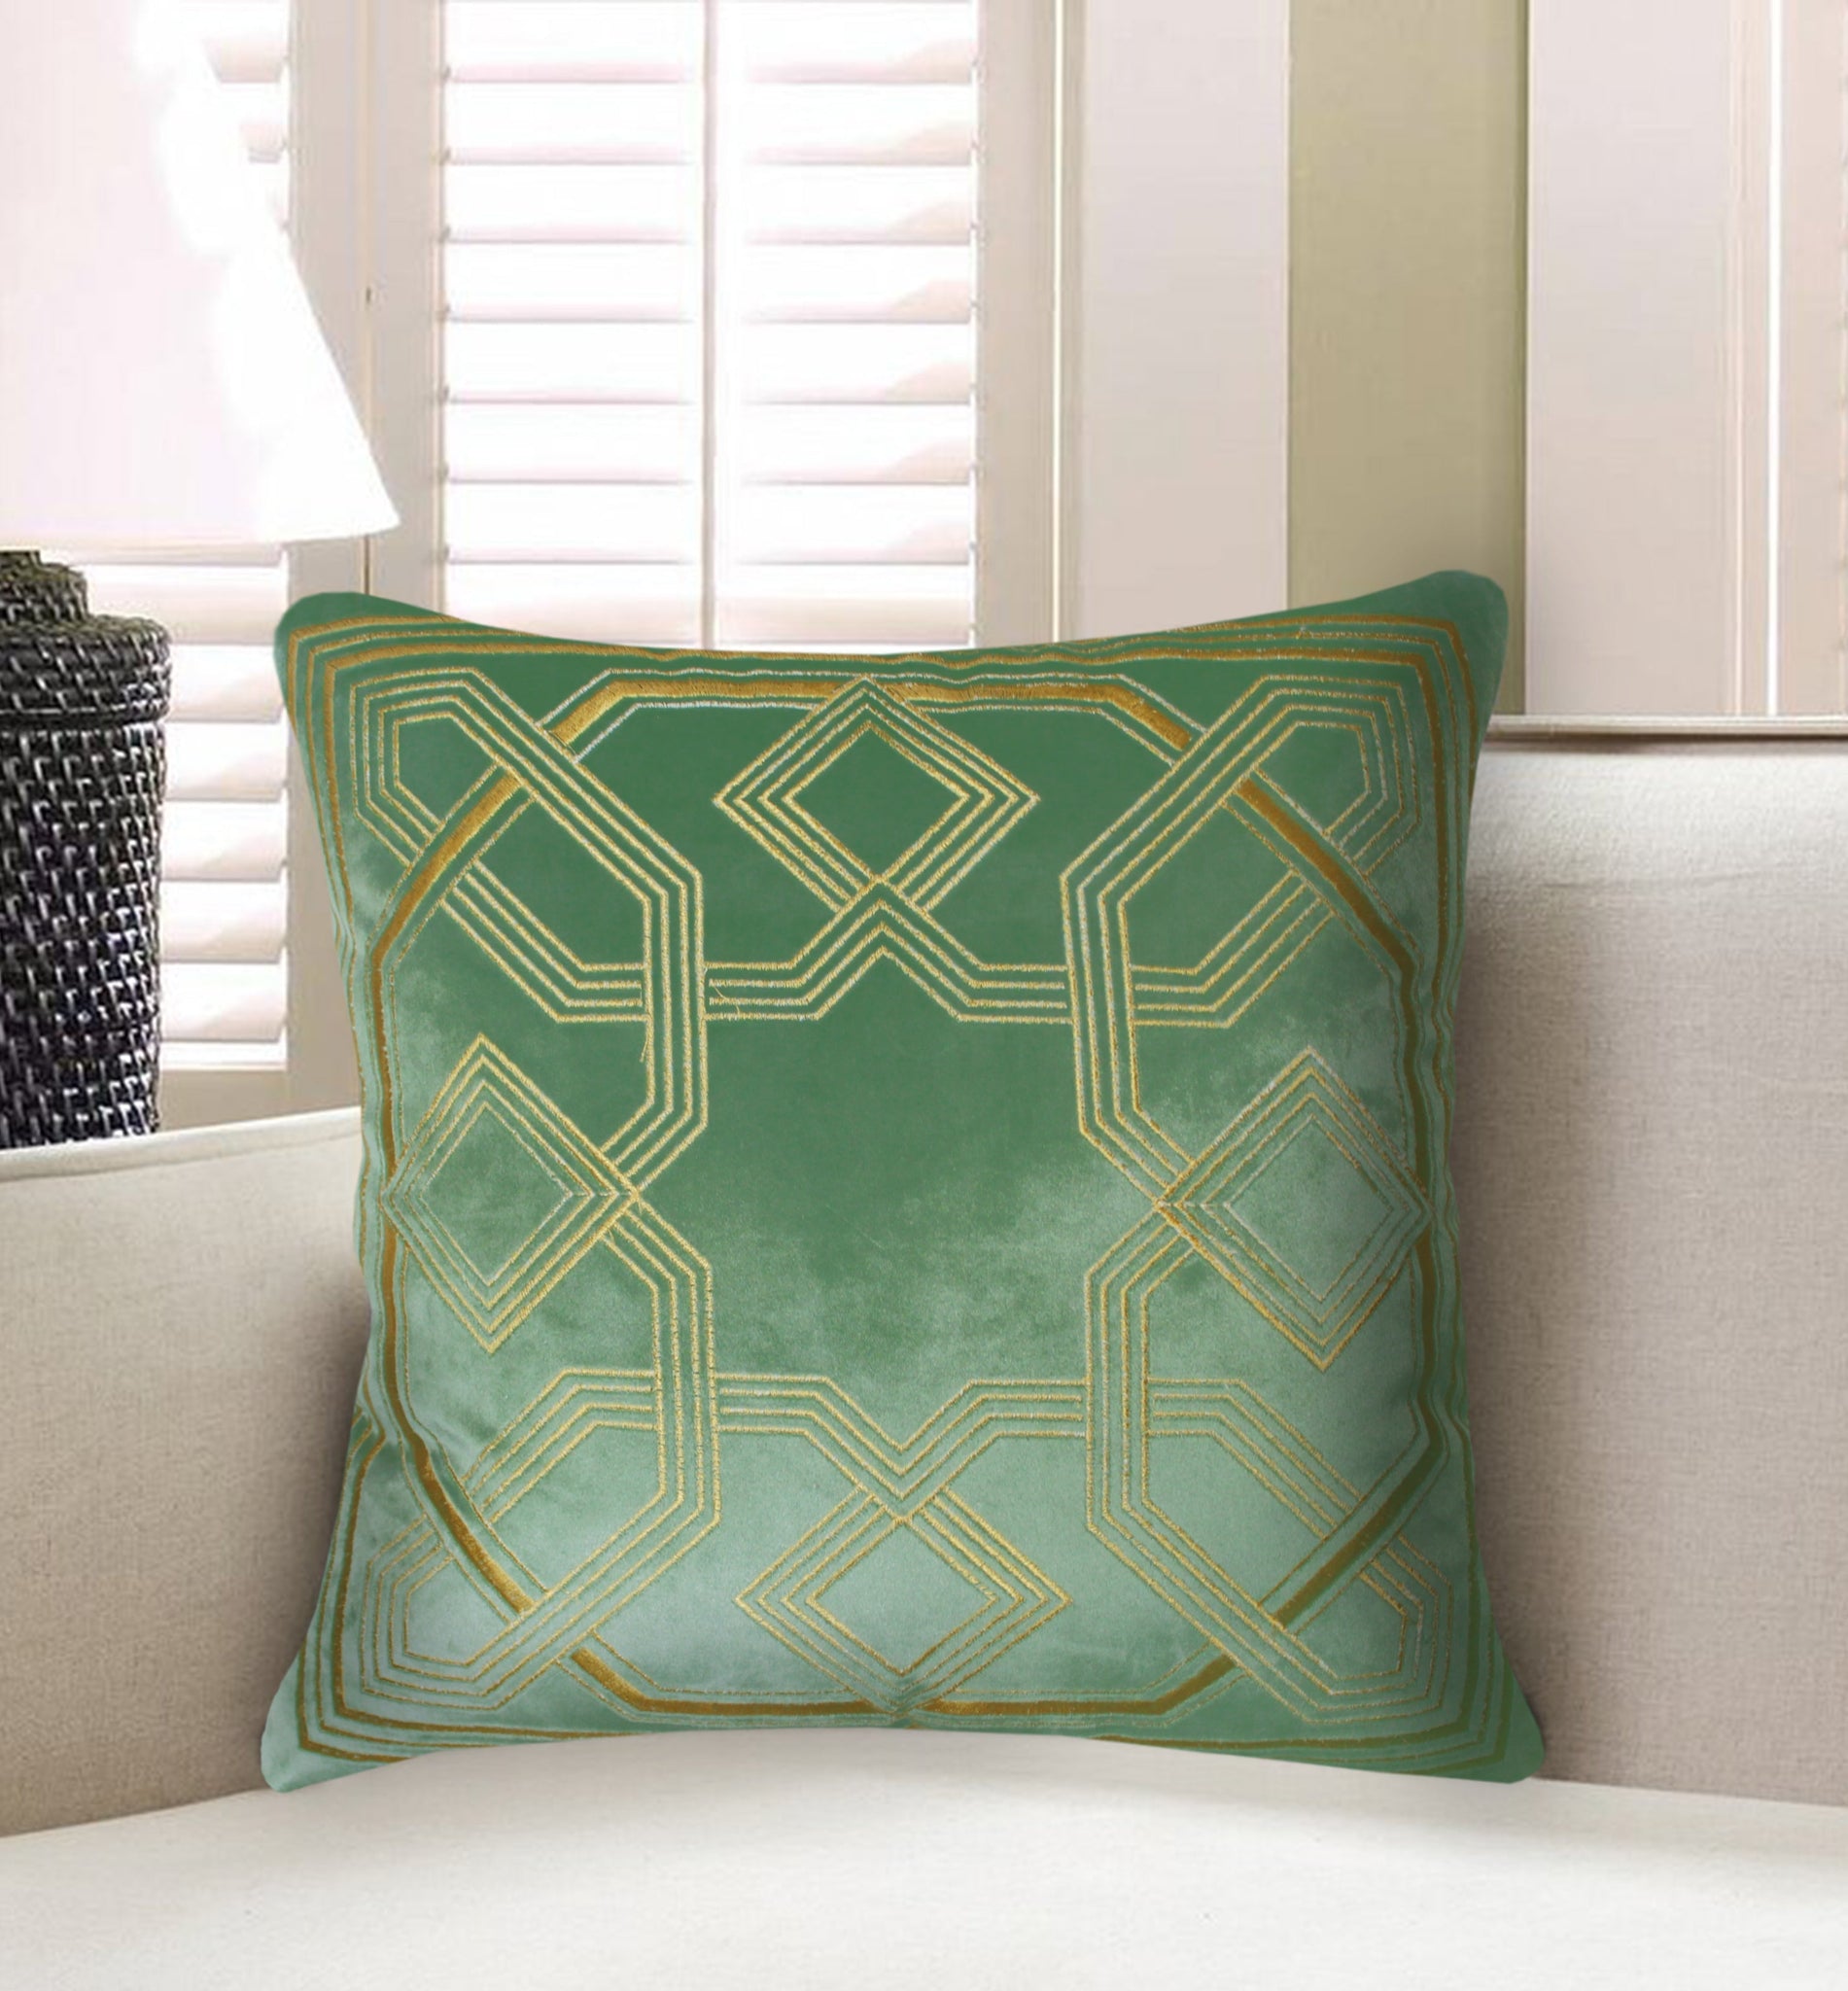 Green Velvet Cushion Cover Arabesque Geometric Embroidery Decorative Pillow Classic Home Decor Throw Pillow for Sofa Chair Living Room 45x45 cm 18x18 In